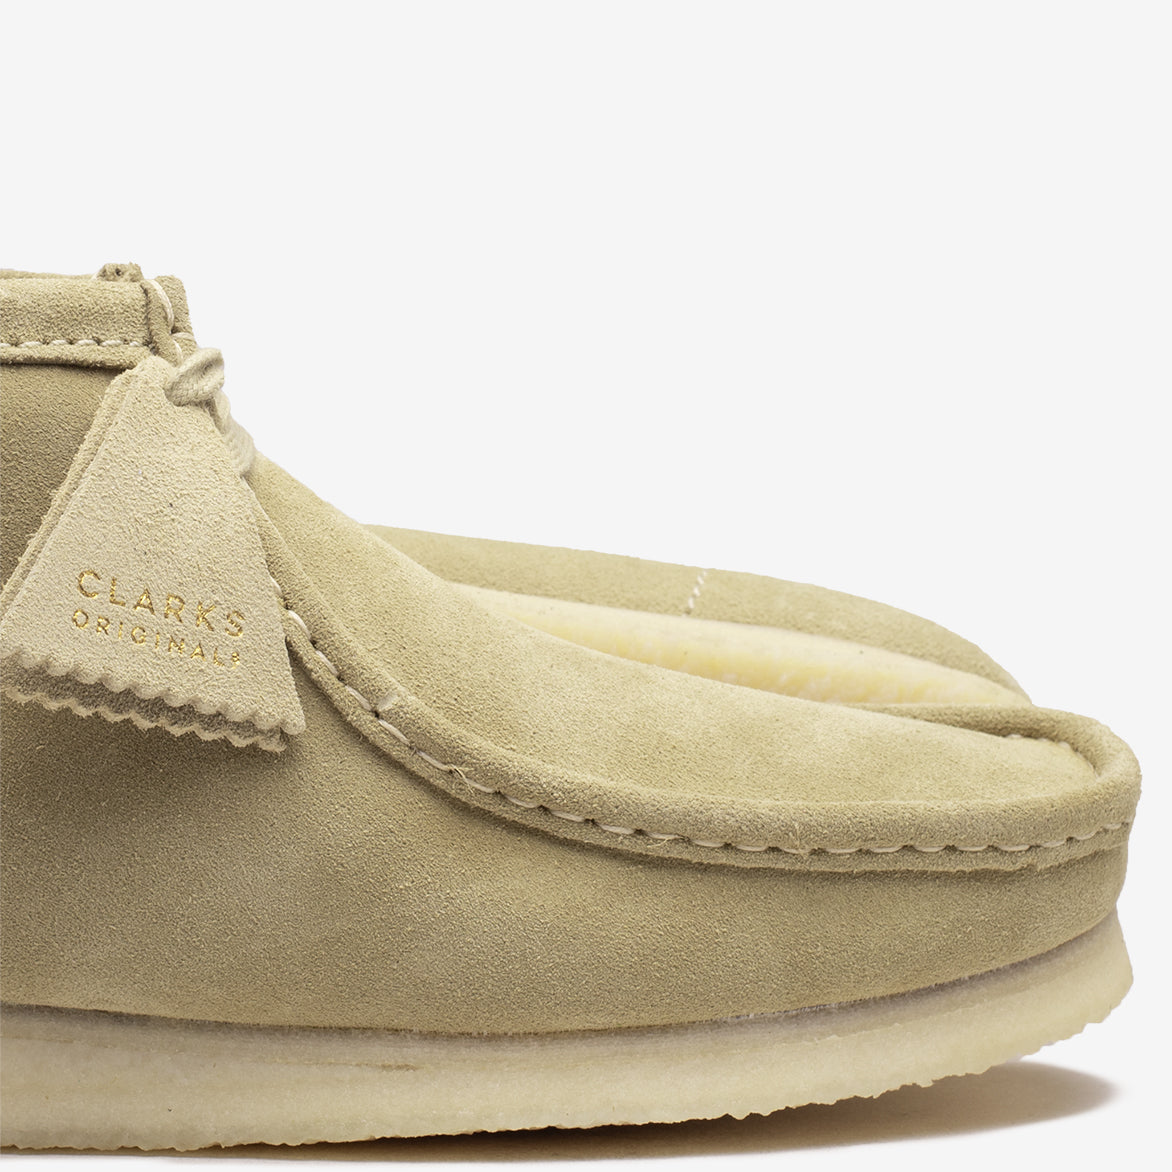 WALLABEE BOOT - MAPLE SUEDE